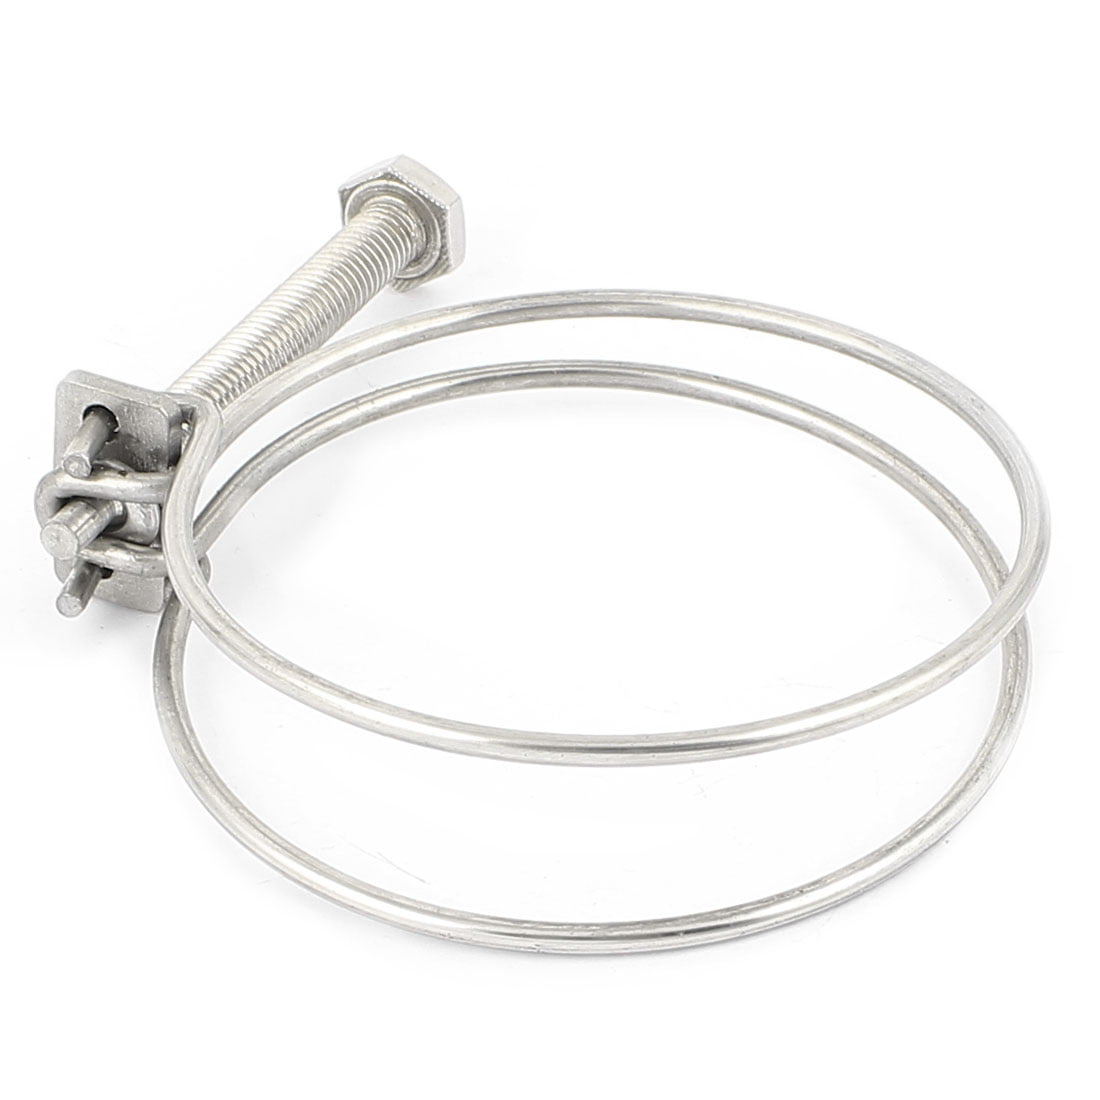 Double Wire Pond Hose Clamps 1/2" 12mm x 2 Pack Designed for Ribbed Pond Tube 